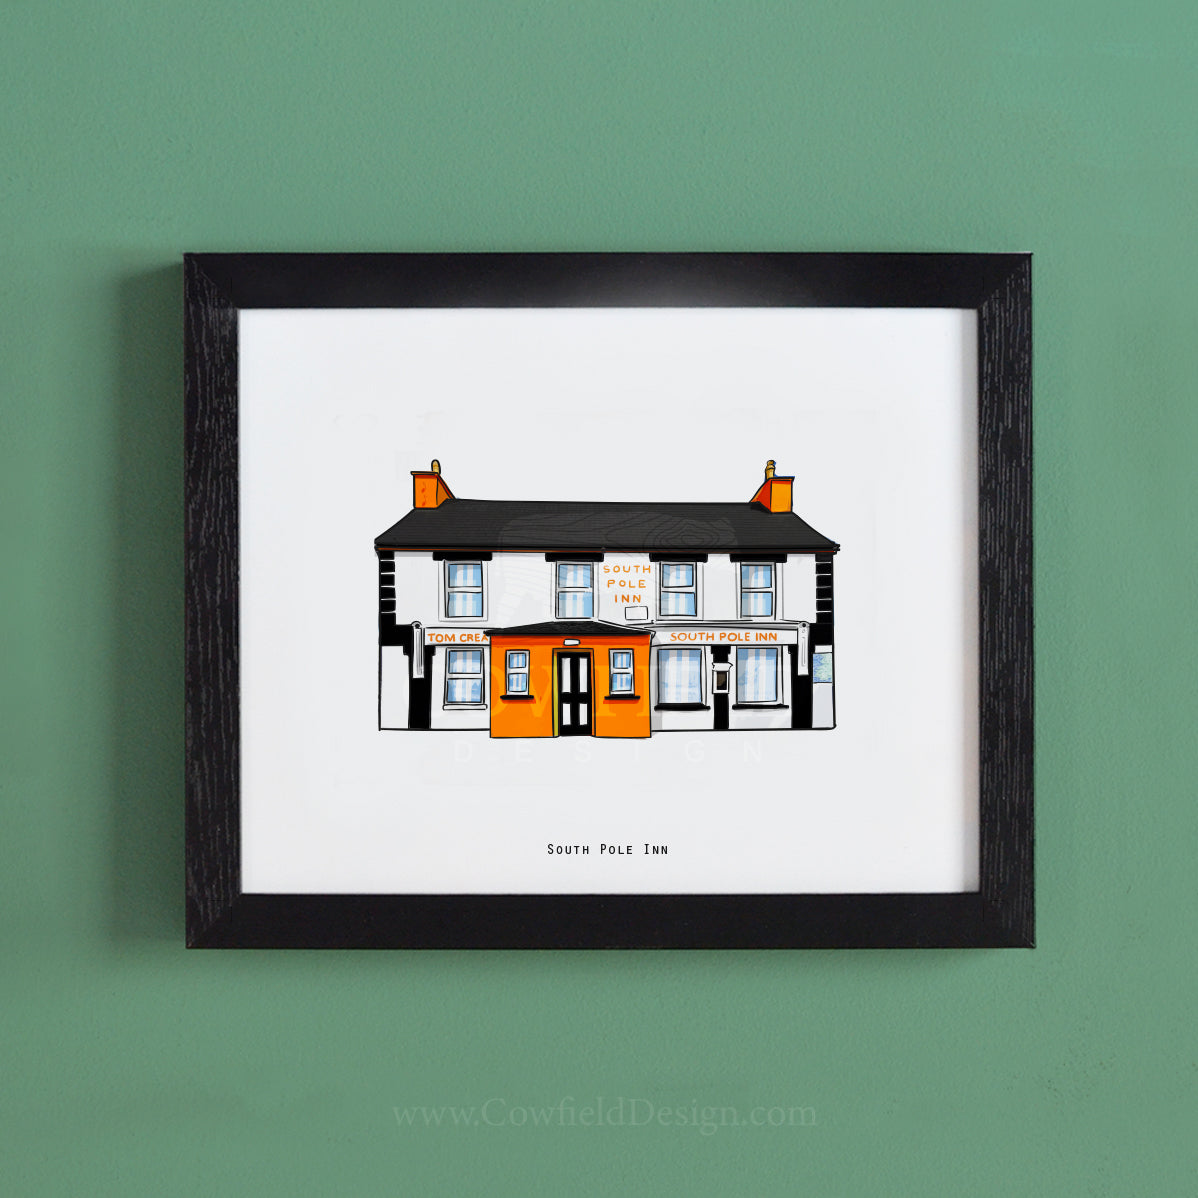 South Pole Inn Illustrated Pubs of Kerry